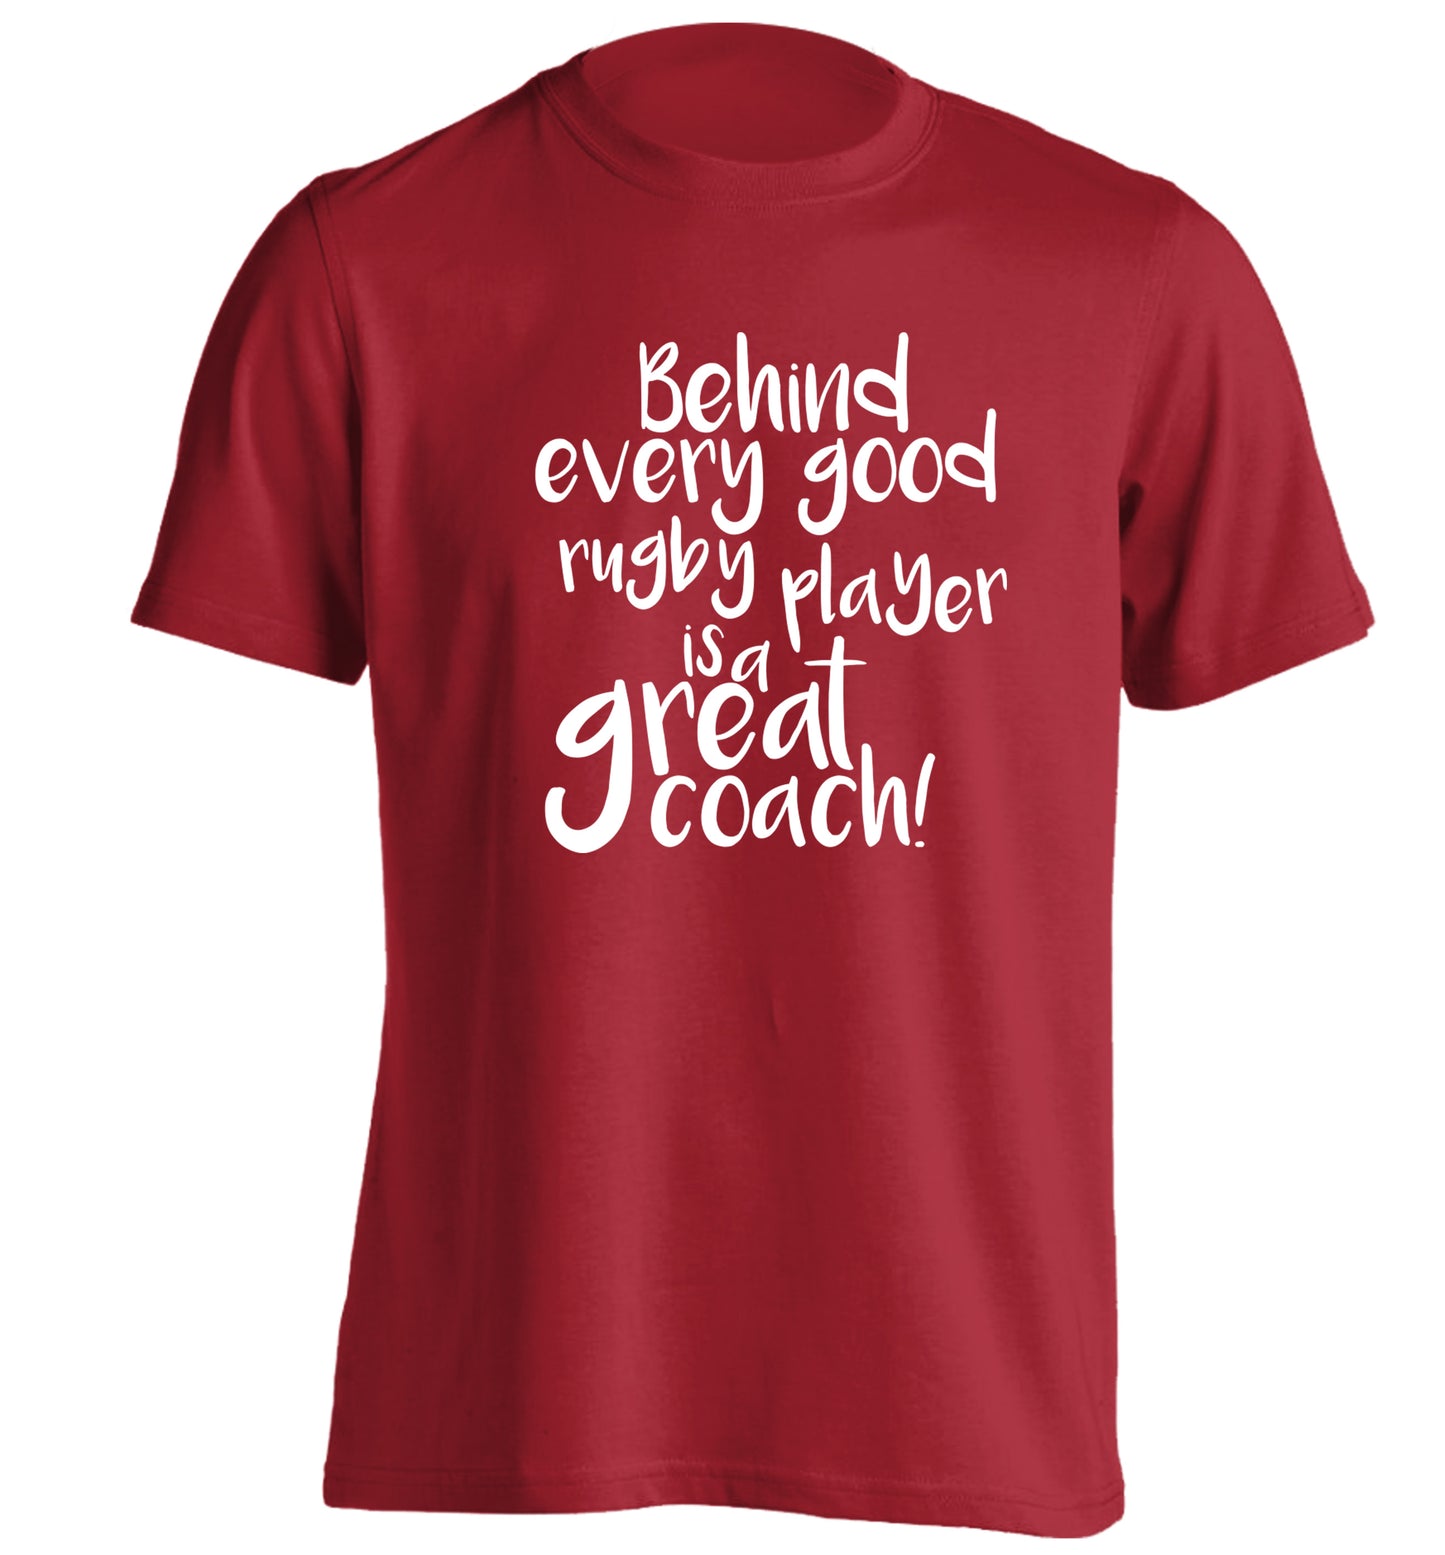 Behind every goor rugby player is a great coach adults unisex red Tshirt 2XL